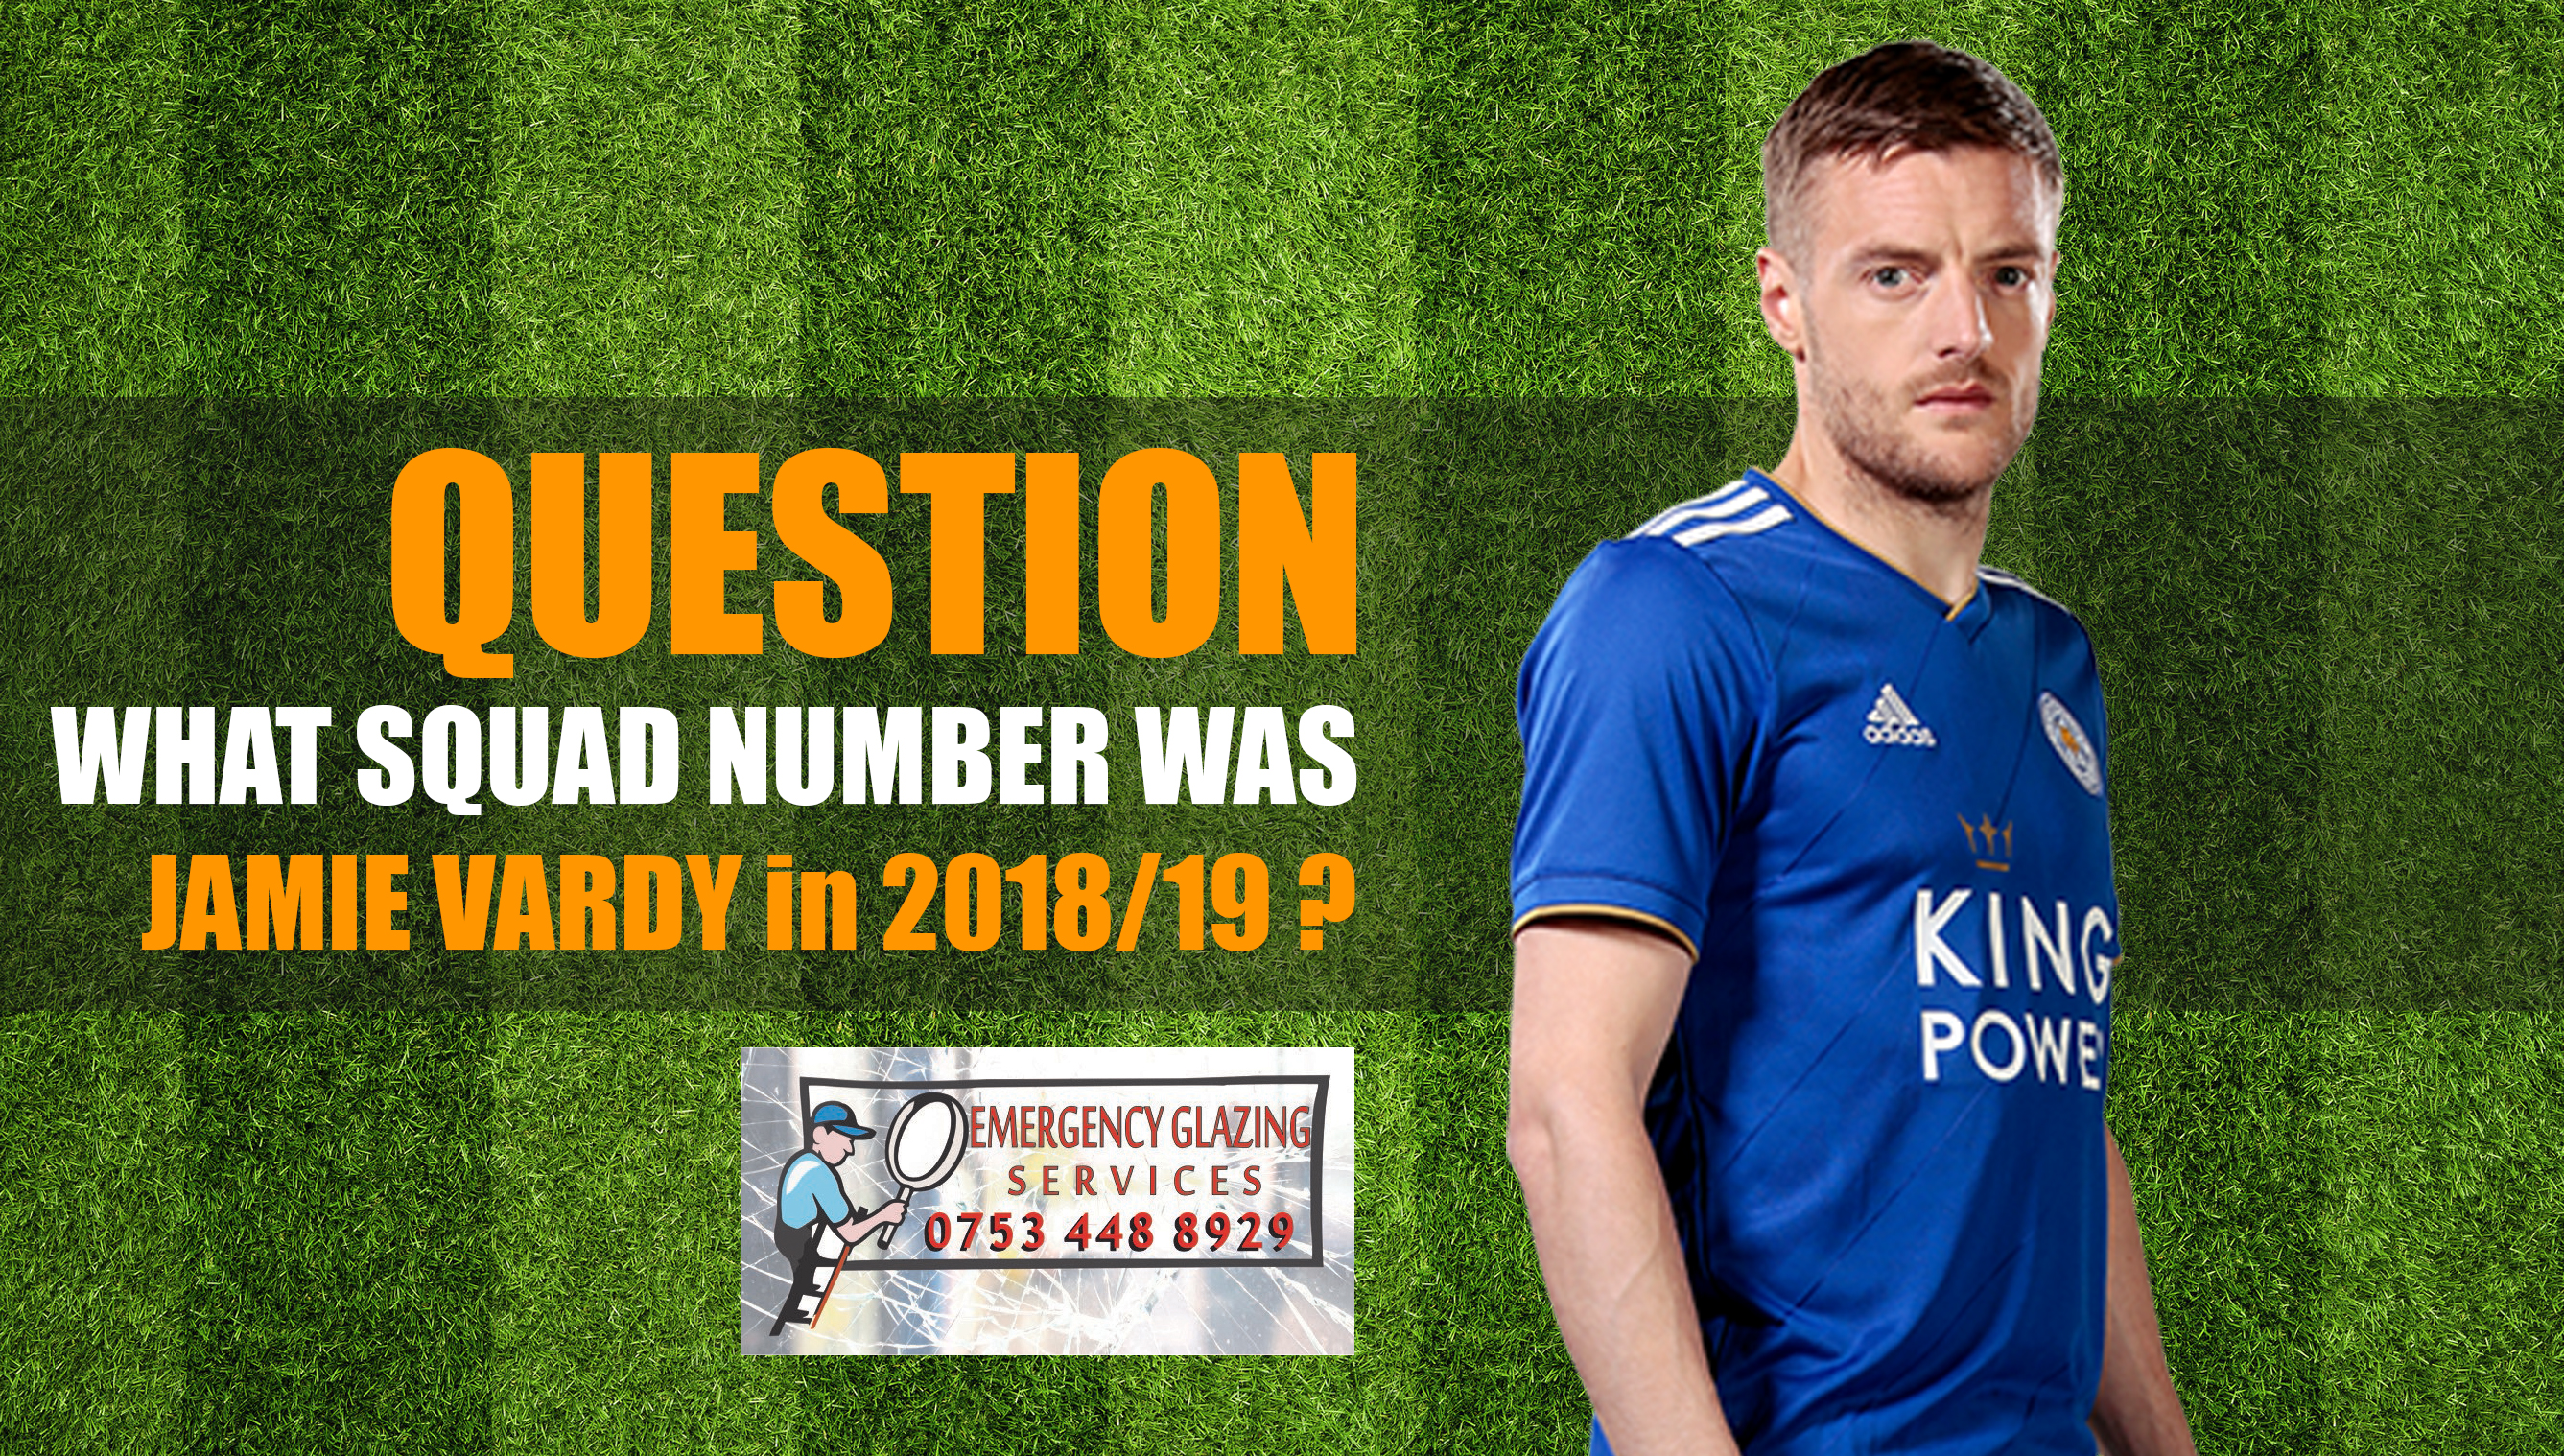 vardy jersey number